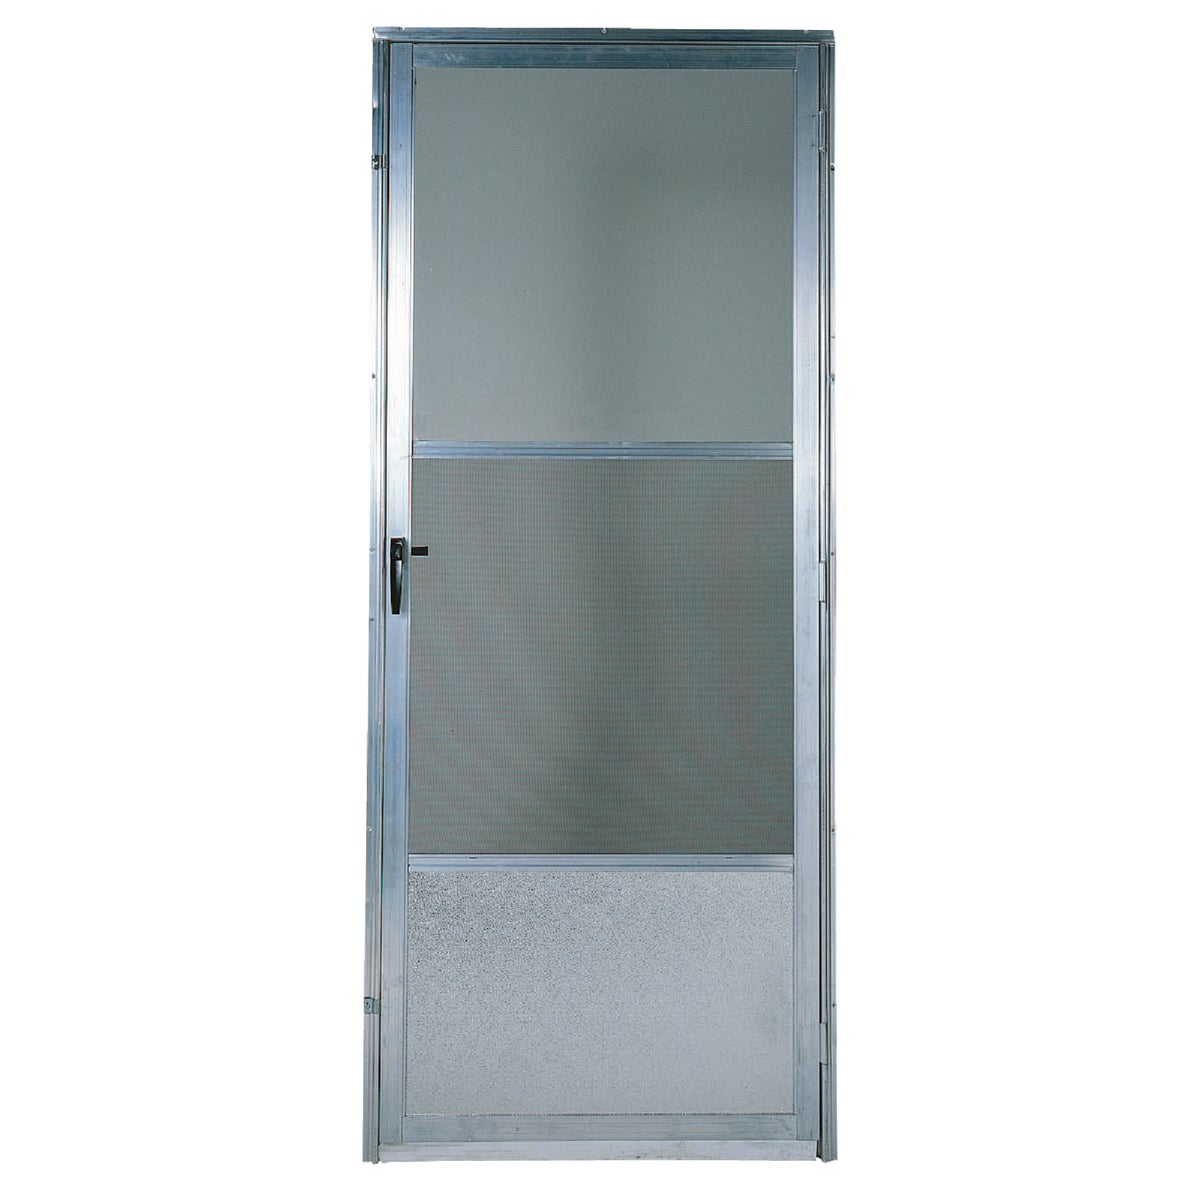 Croft Imperial Style 32 In. W x 80 In. H x 1 In. Thick Mill Self-Storing Aluminum Storm Door